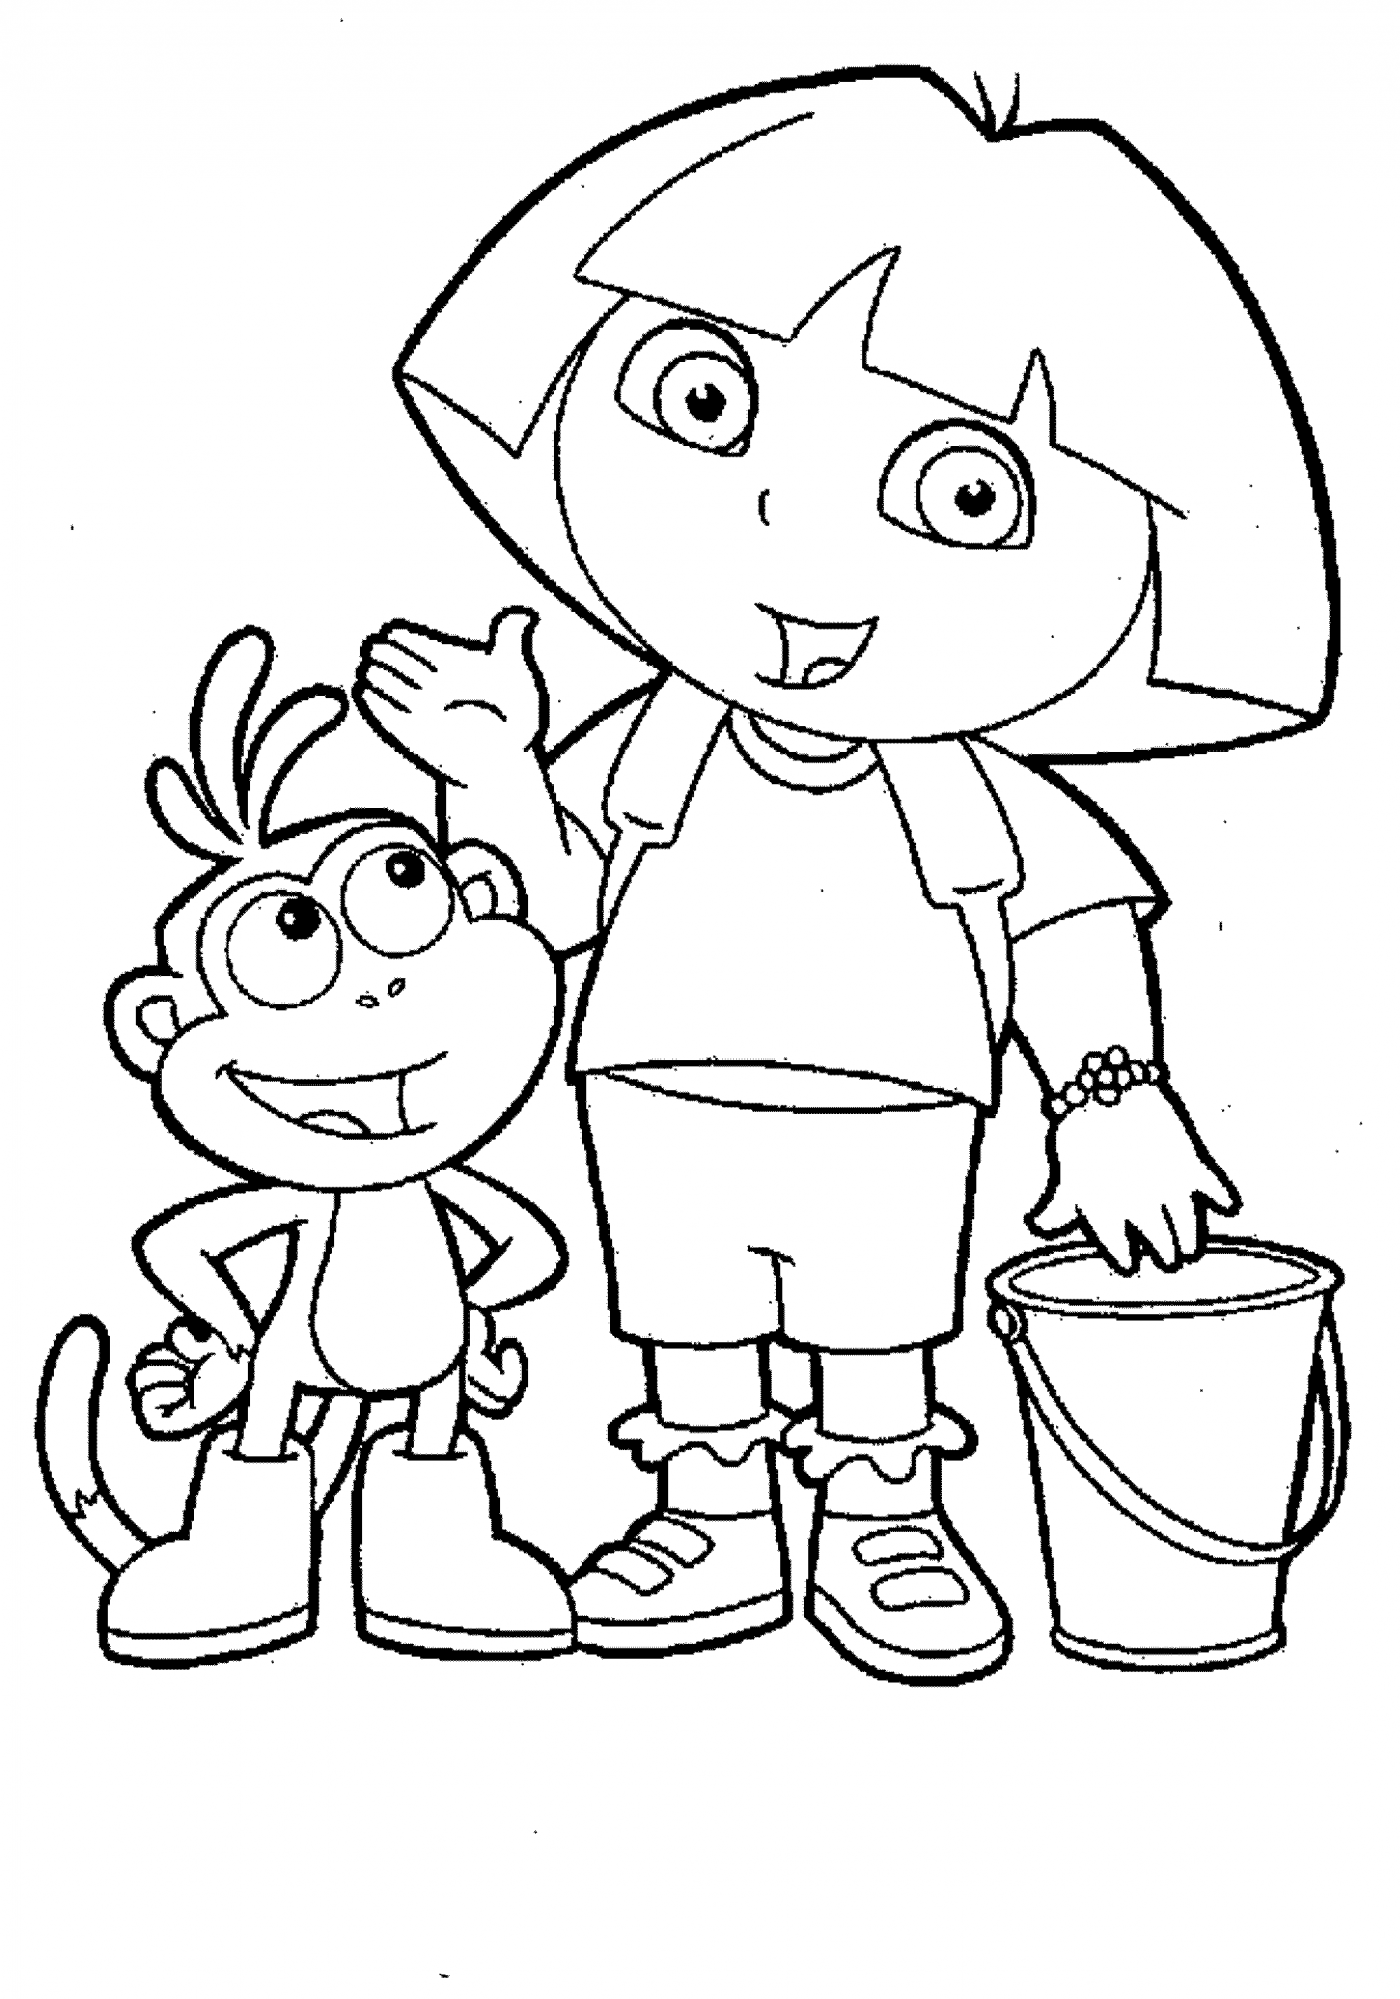 print-download-dora-coloring-pages-to-learn-new-things